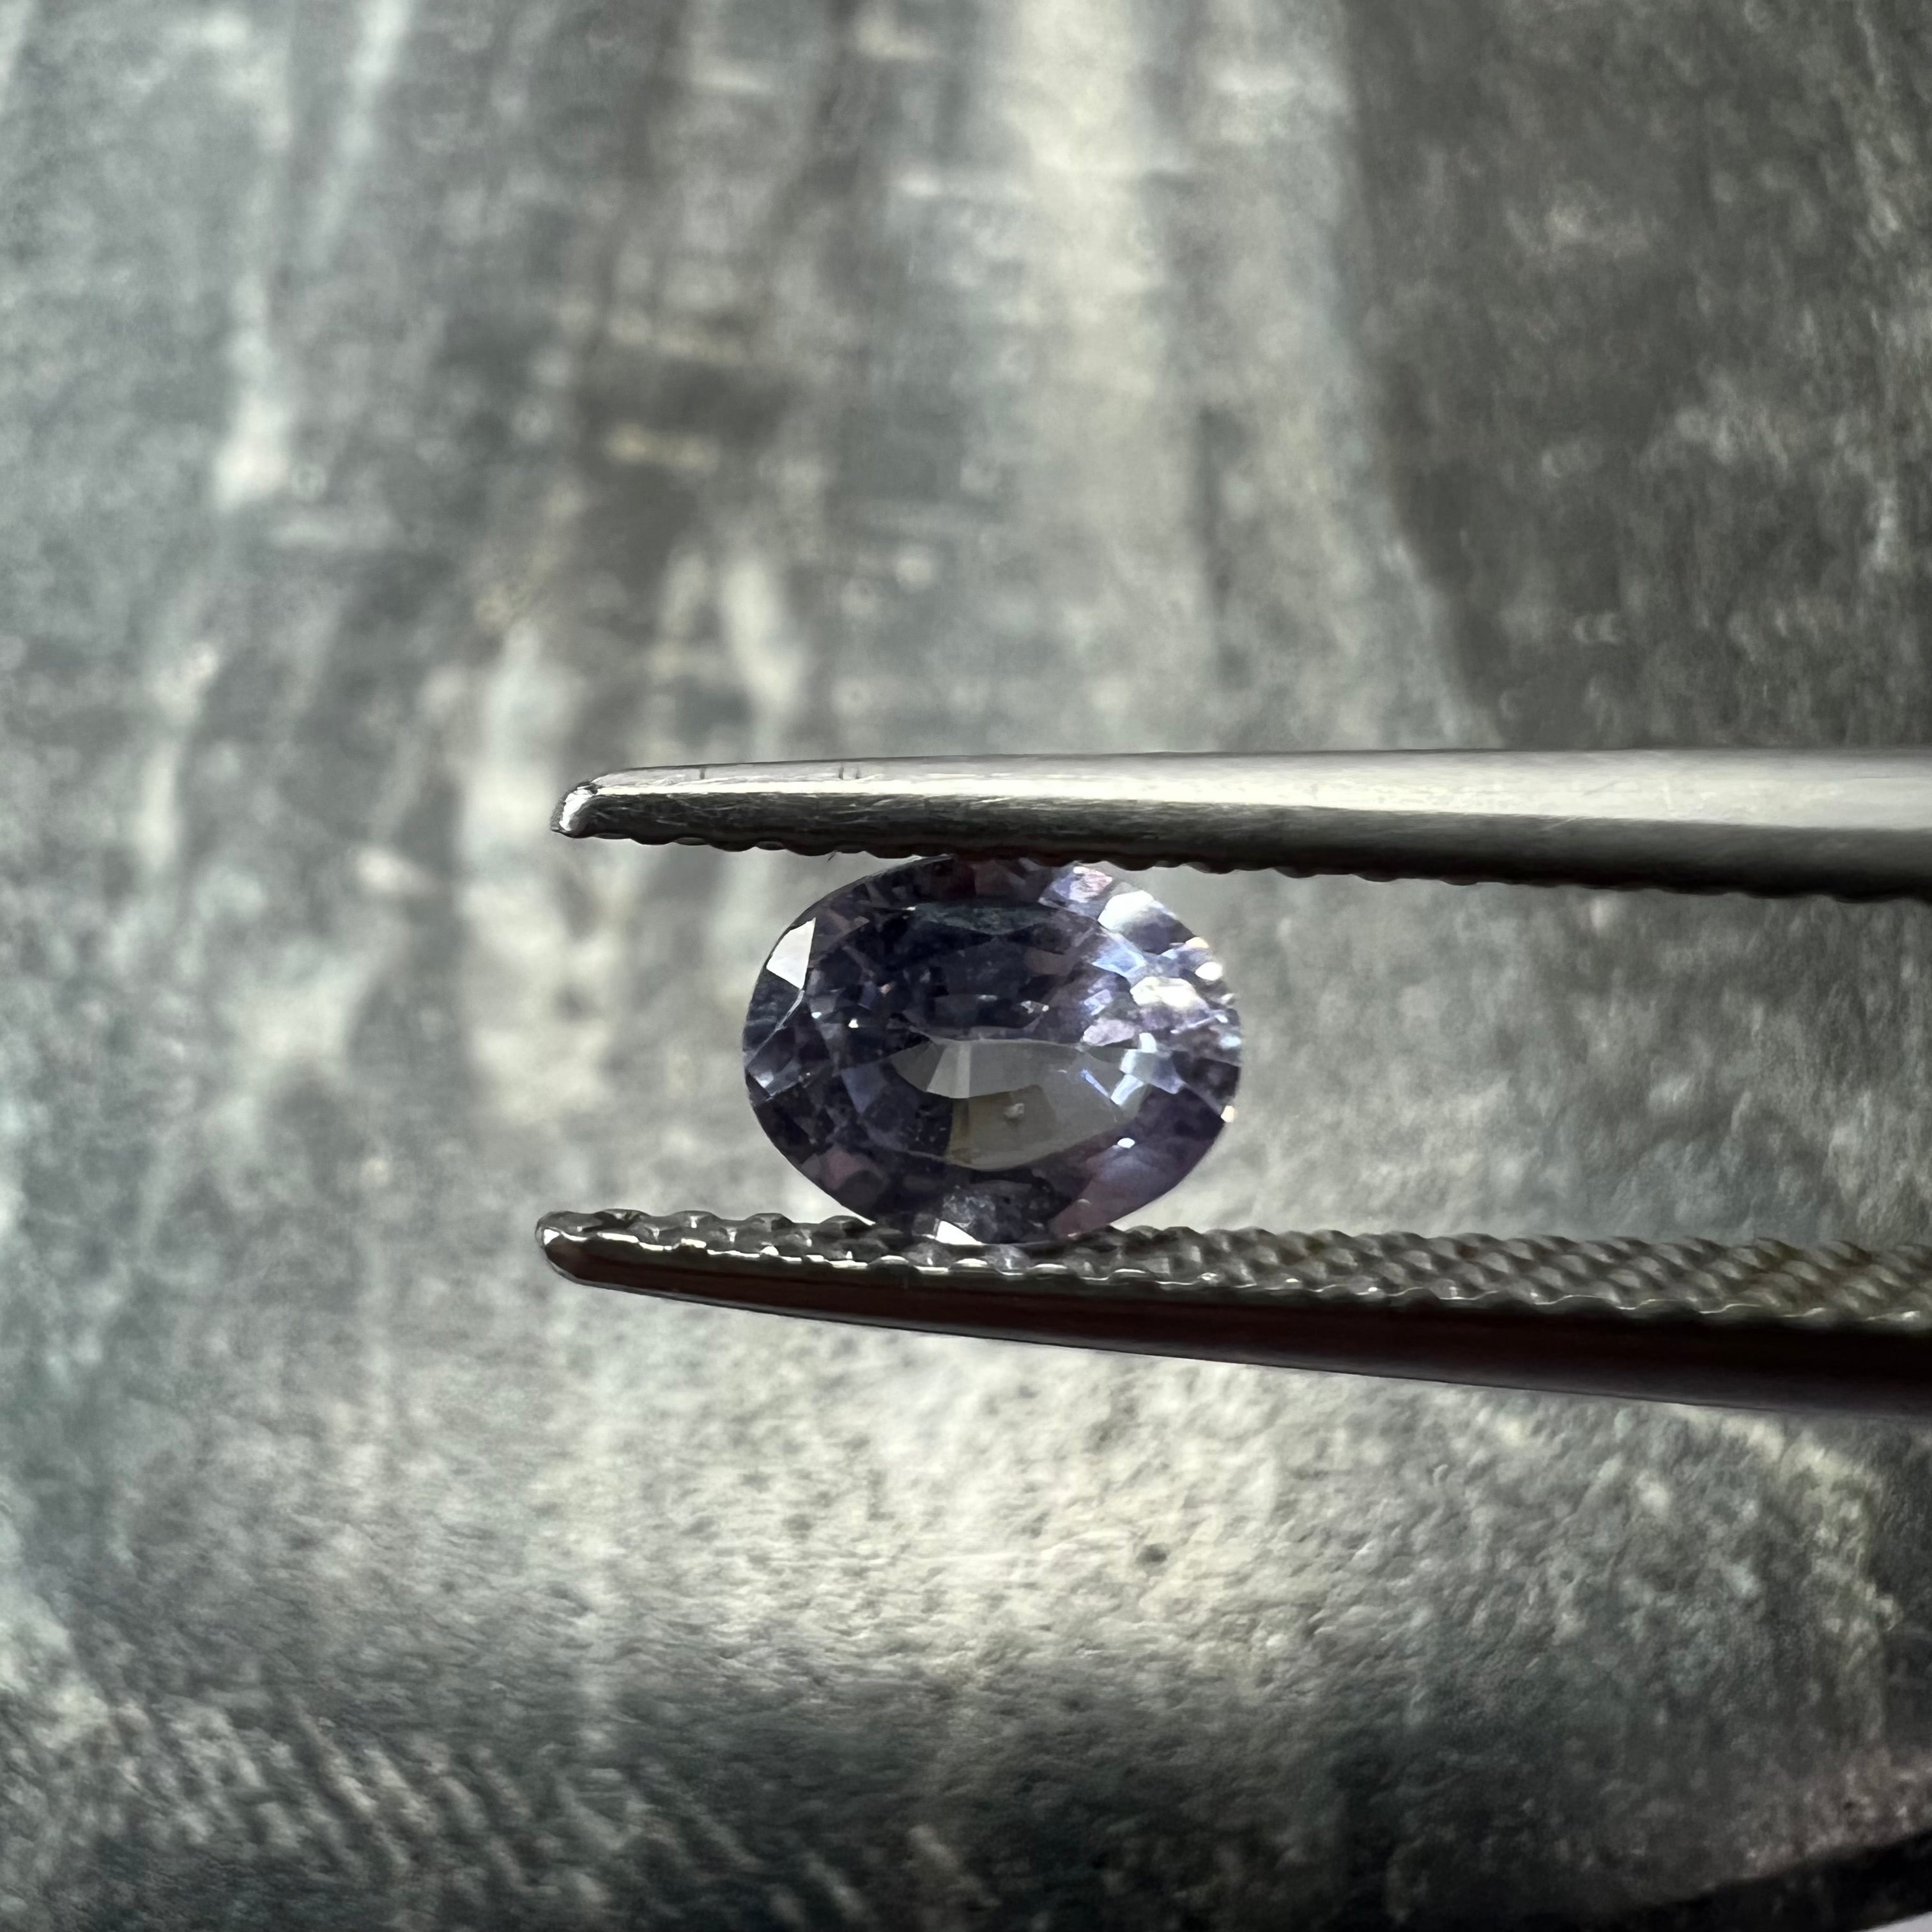 .48CT Loose Oval Blue Sapphire 5.36x4.28x2.9mm Earth mined Gemstone